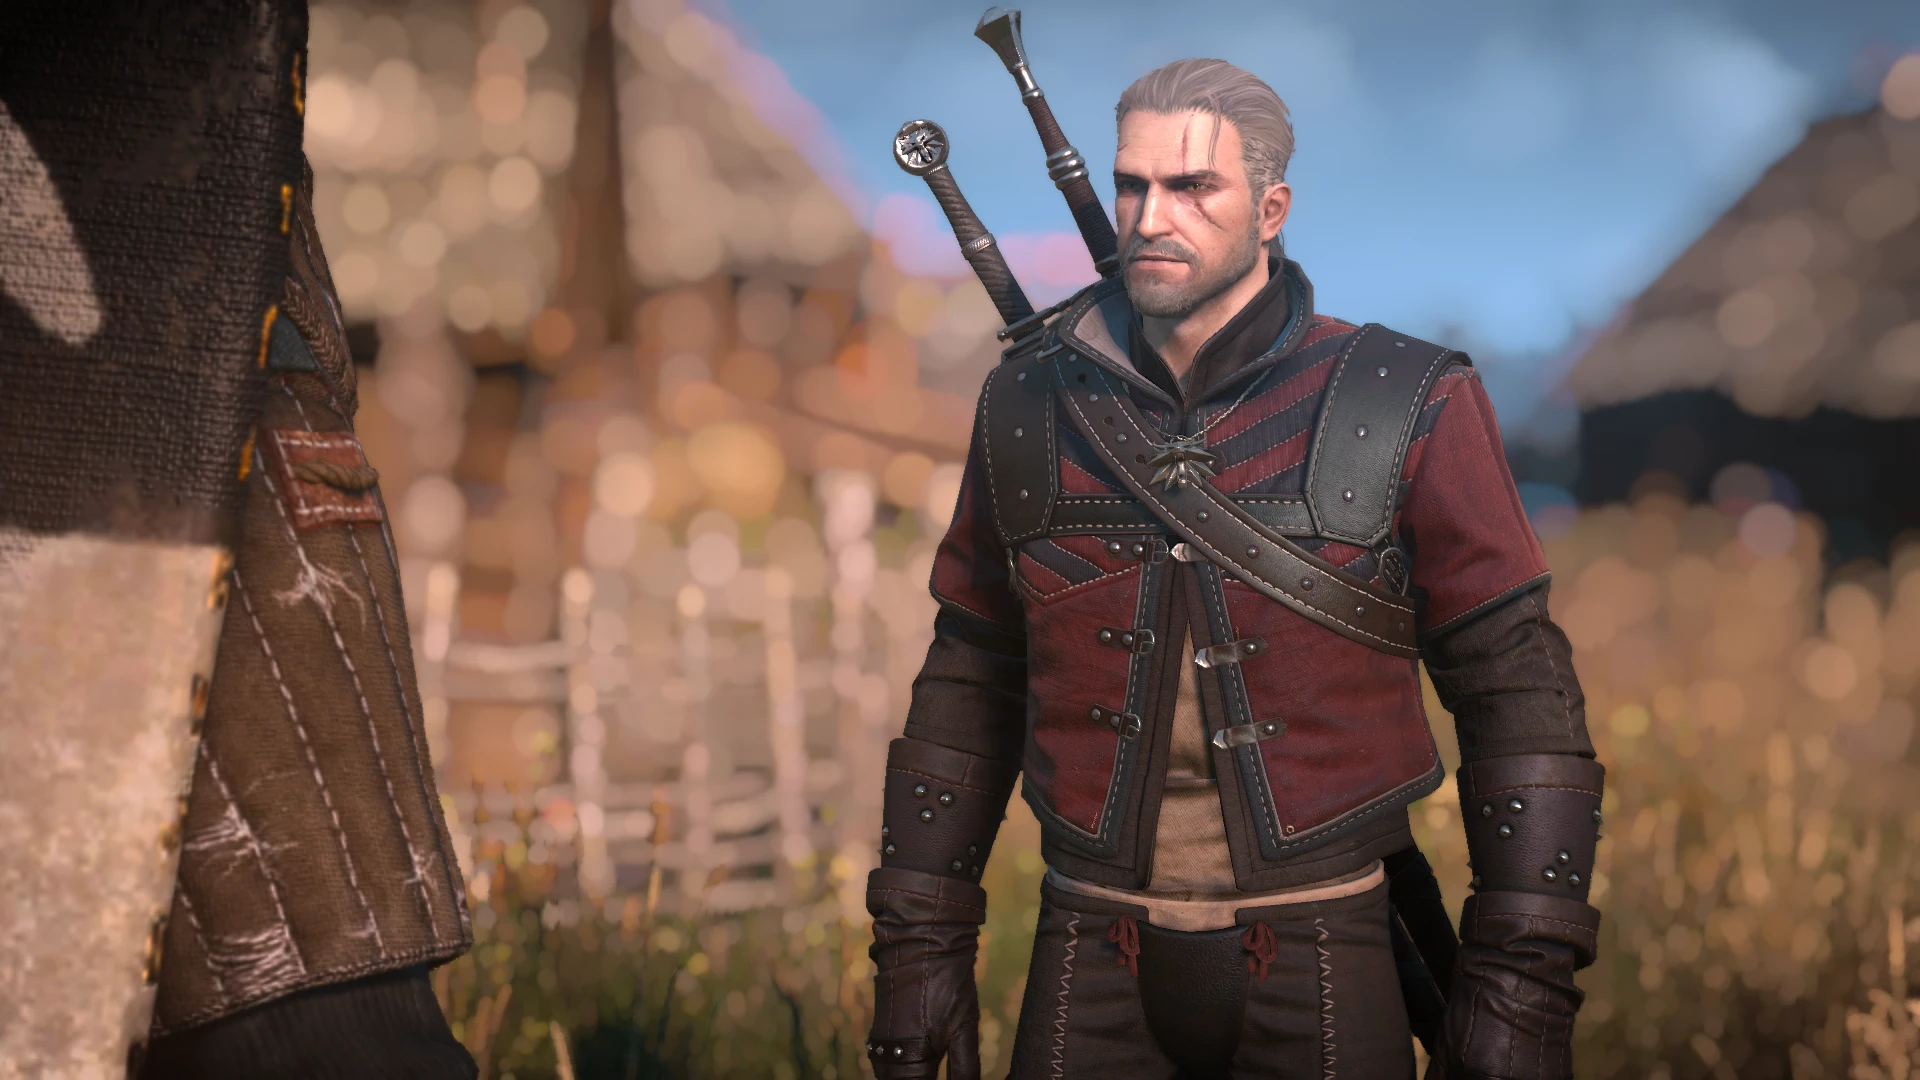 Feel the new visual experience with the witcher 3 hd reworked project 12.0 ...